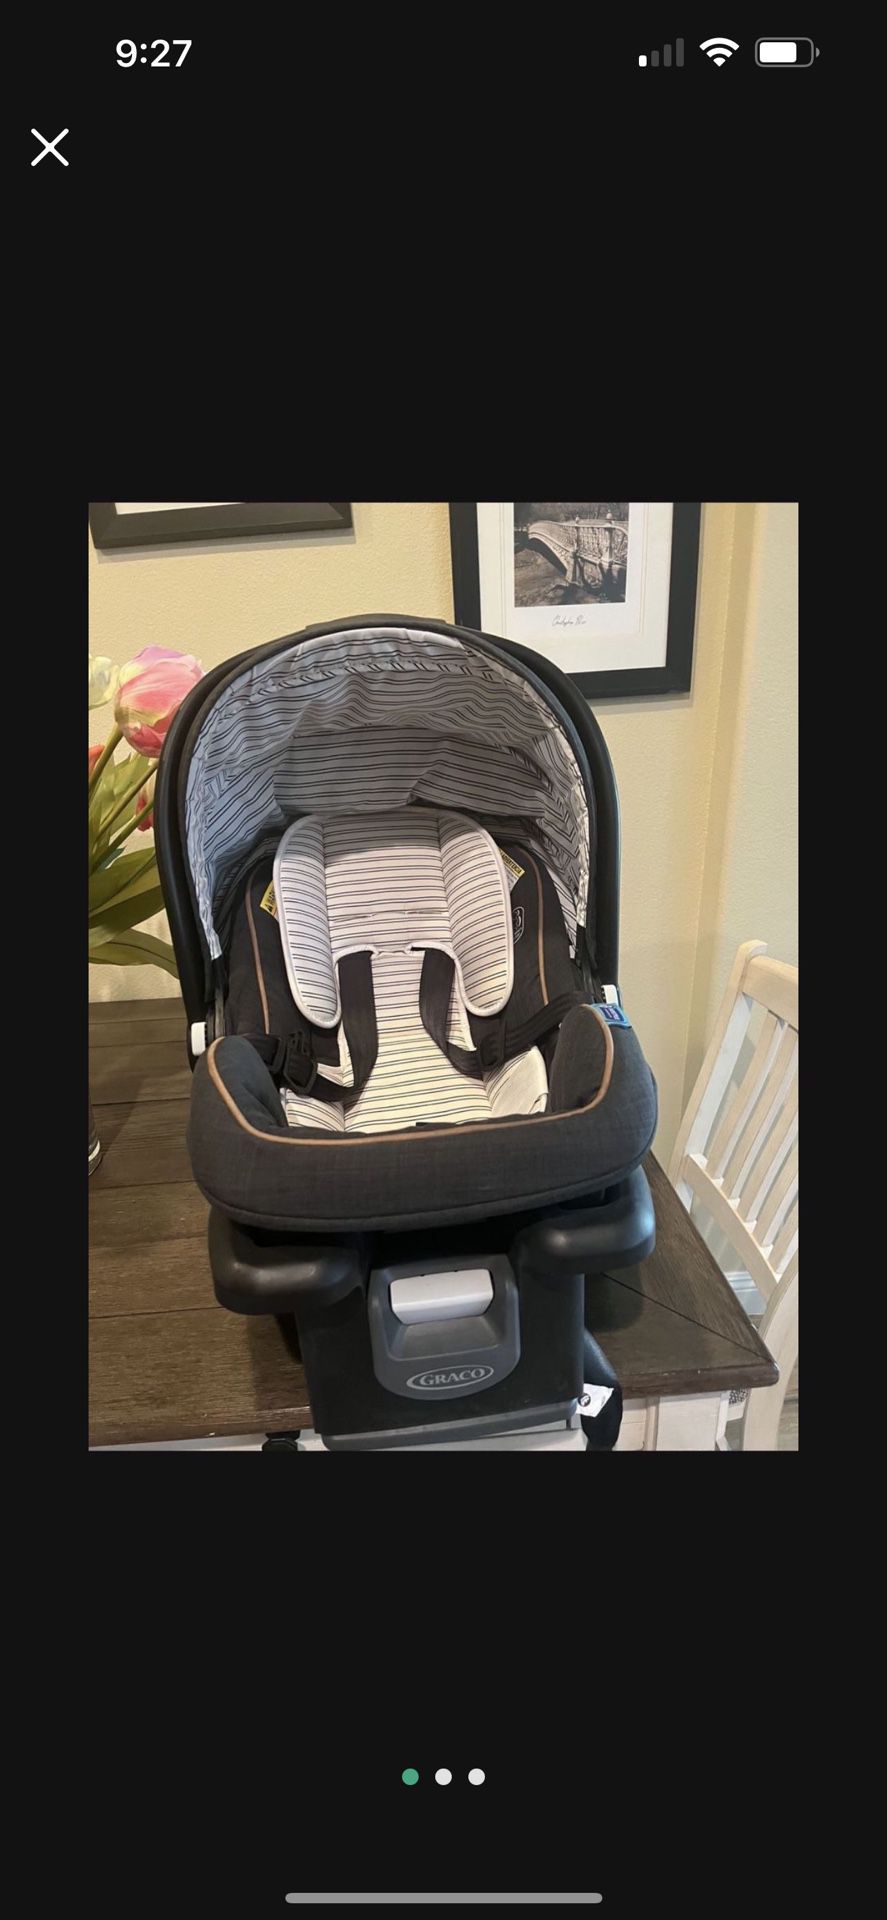 Infant Car Seat With Base 